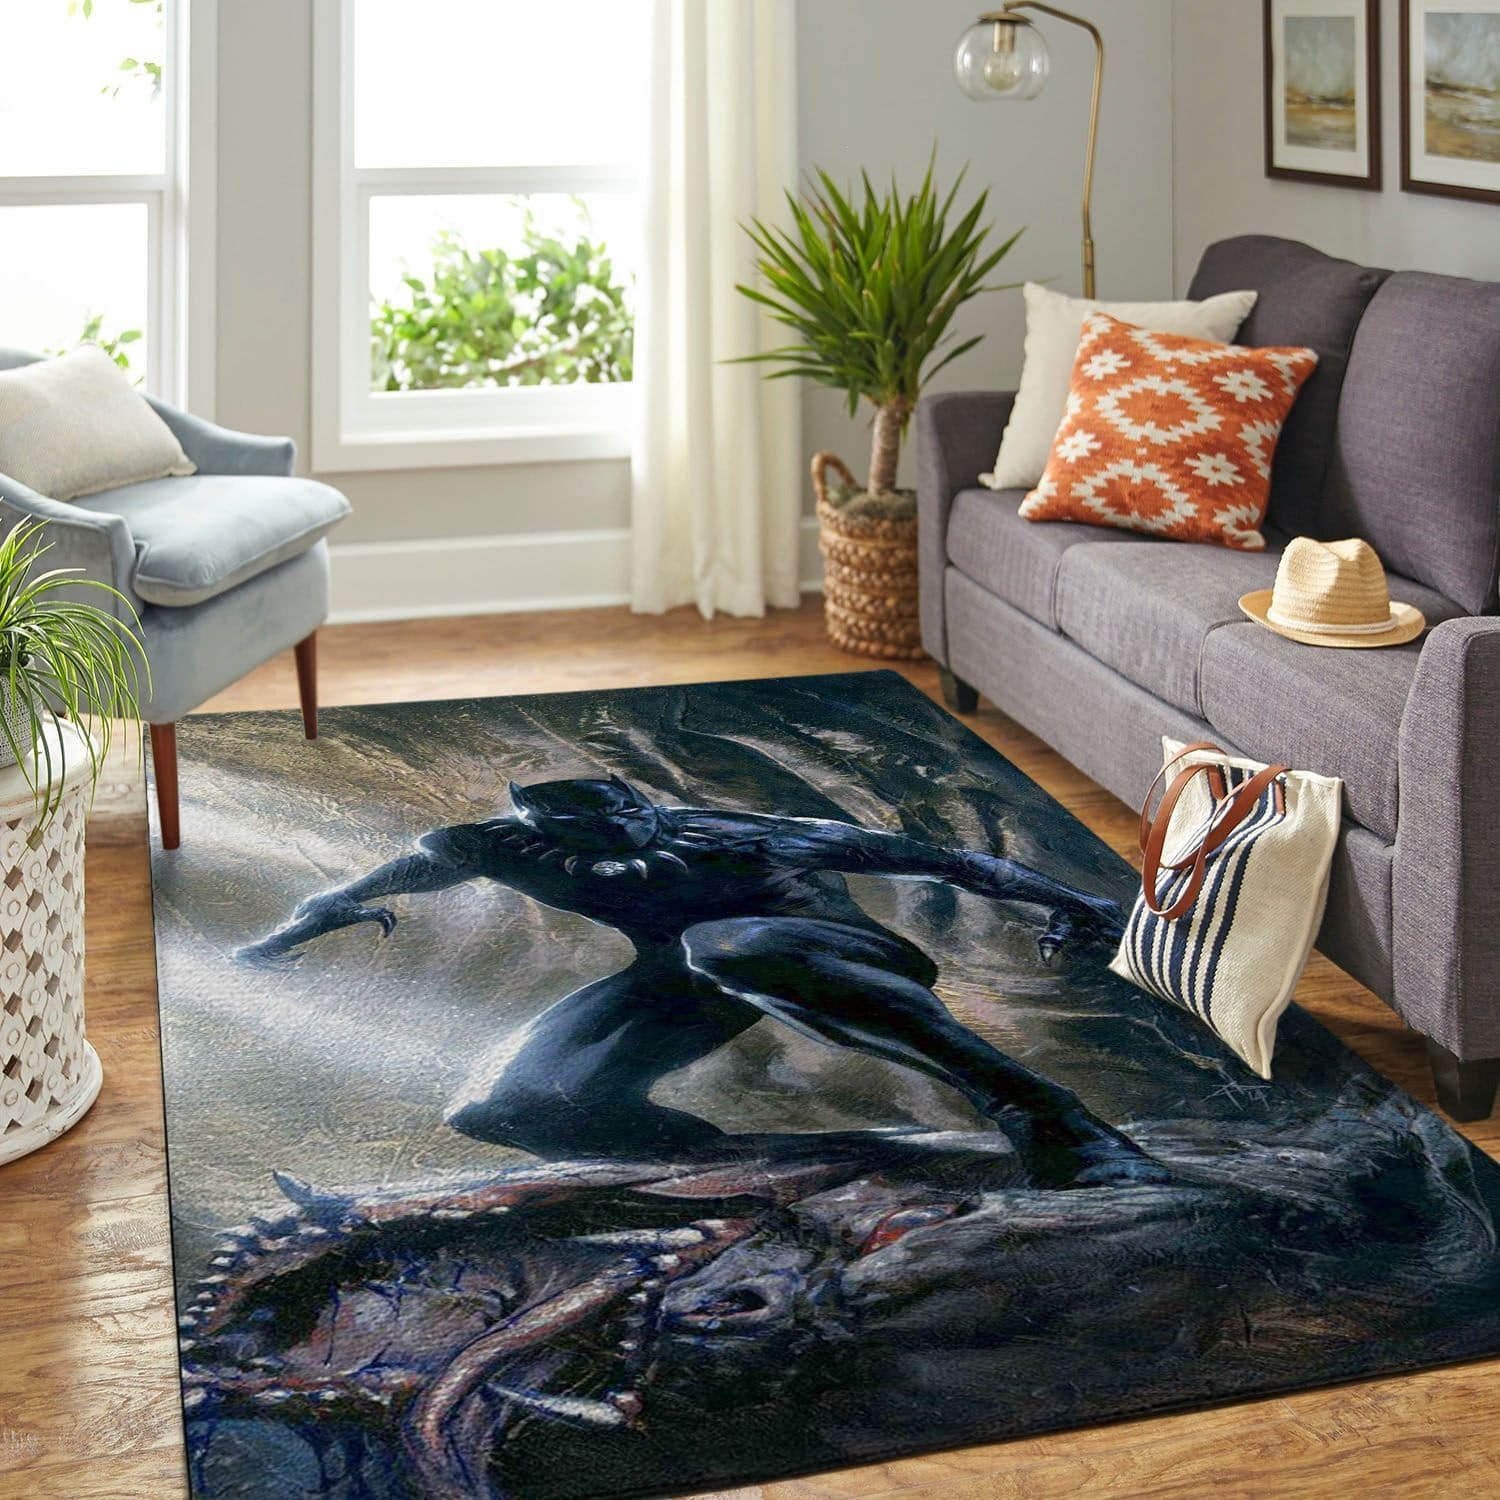 Amazon Black Panther Living Room Area No5742 Rug